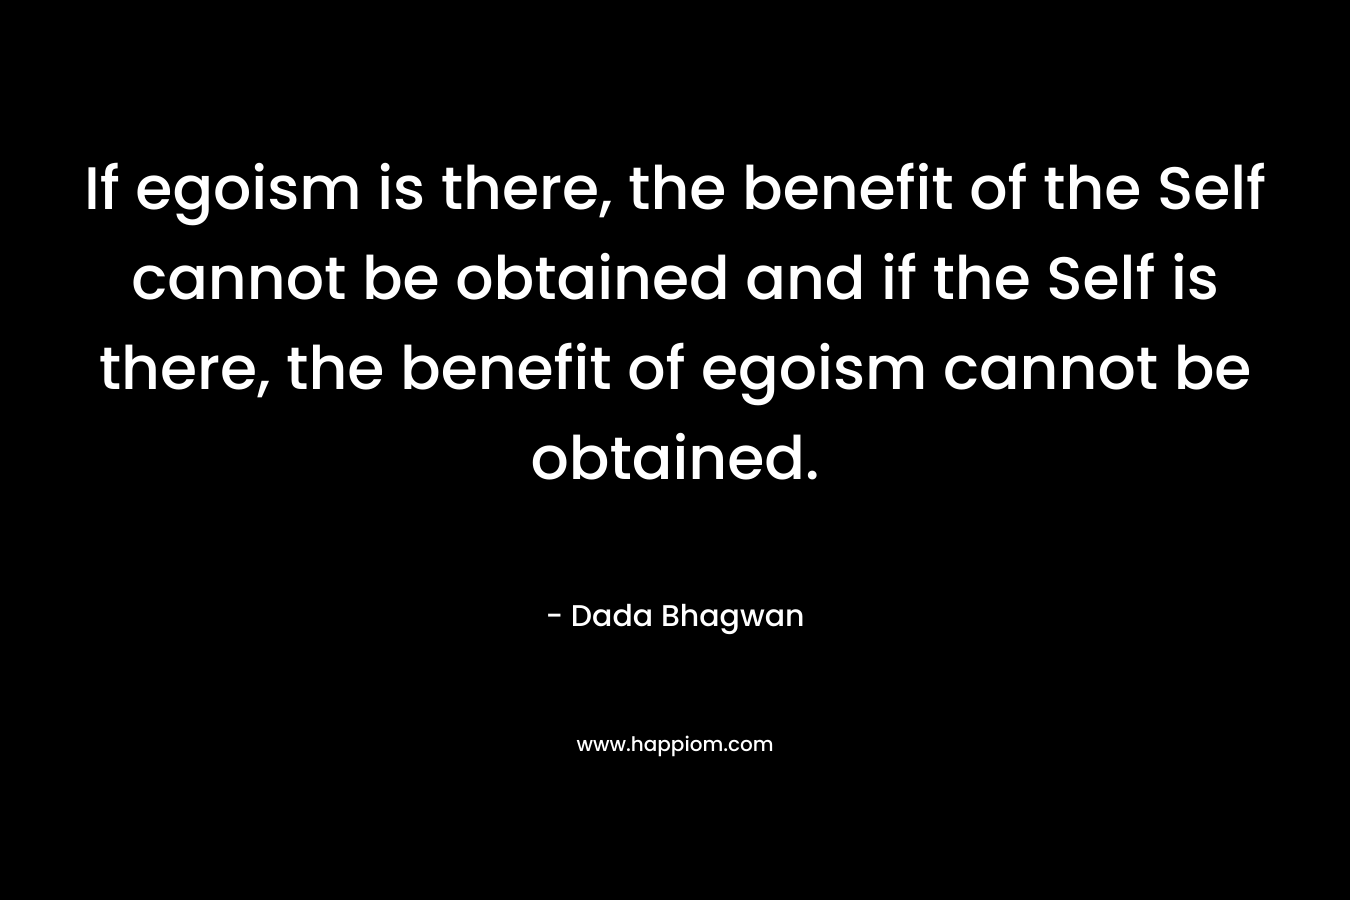 If egoism is there, the benefit of the Self cannot be obtained and if the Self is there, the benefit of egoism cannot be obtained.